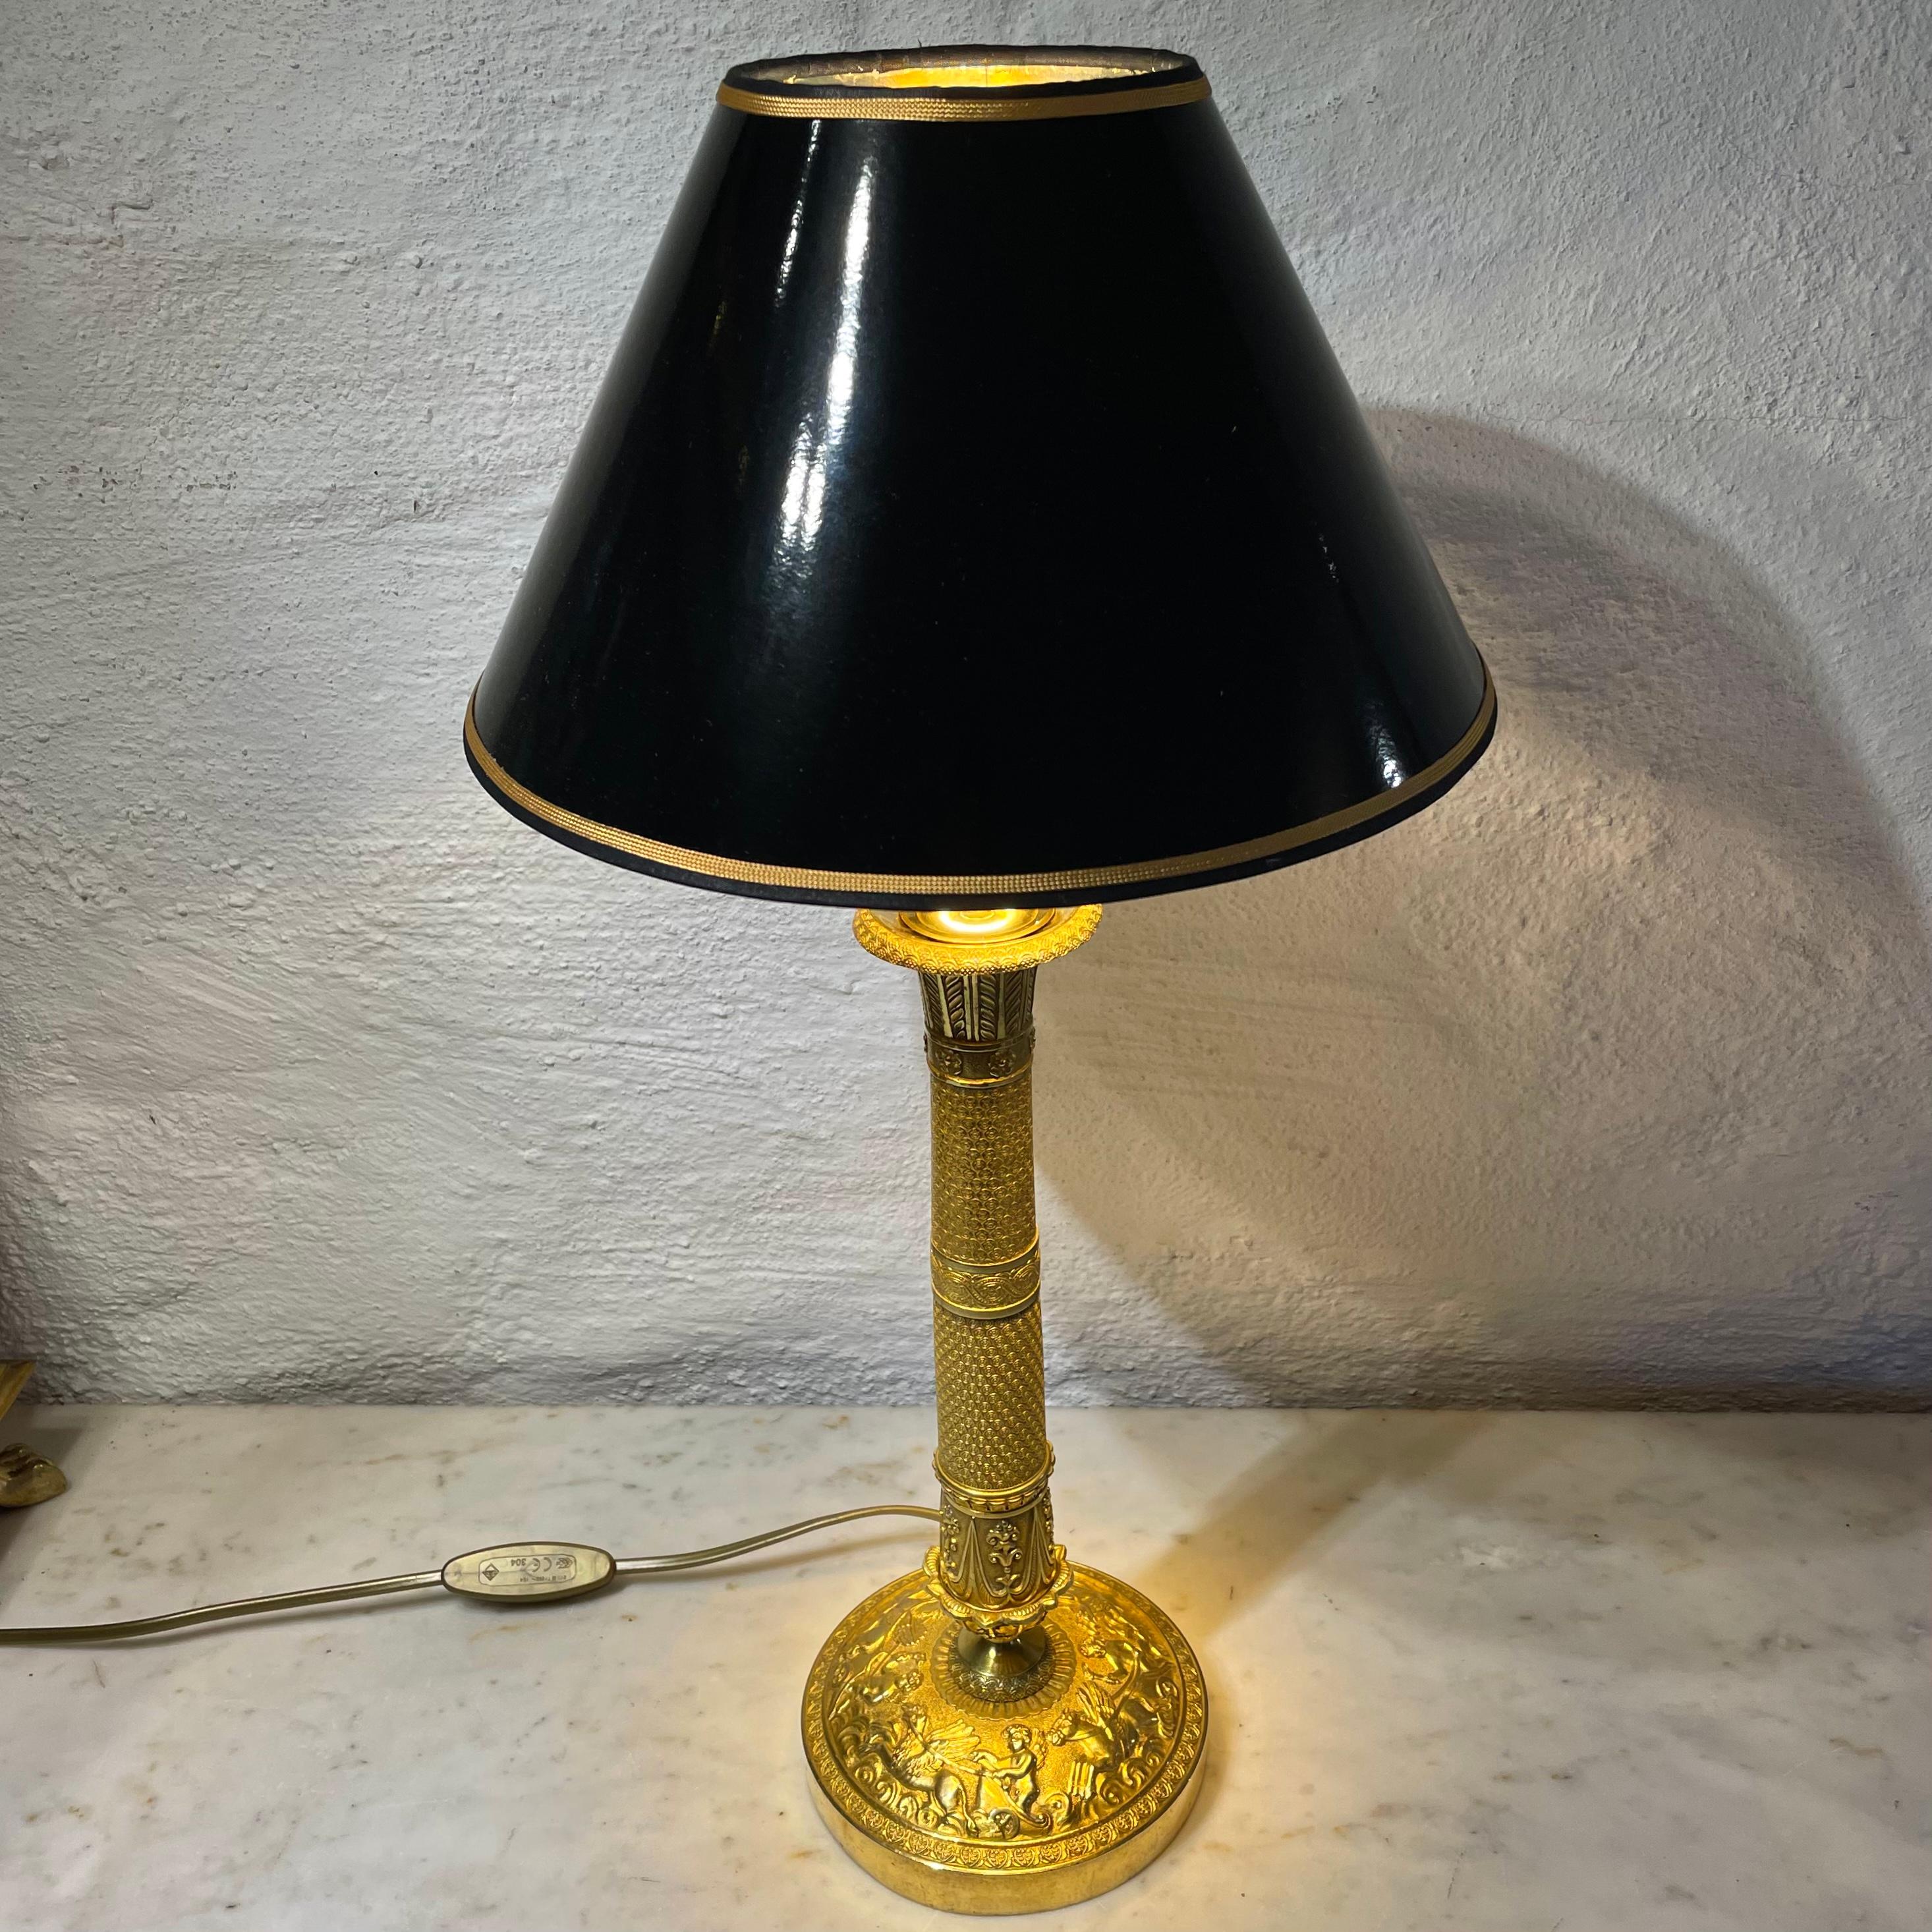 An elegant table lamp in gilded bronze. Originally an Empire Candlestick from the 1820s, converted into a table lamp during the 20th century.

The lampshade in black lacquer with a gilded inside to give a cozy light.

New rewired